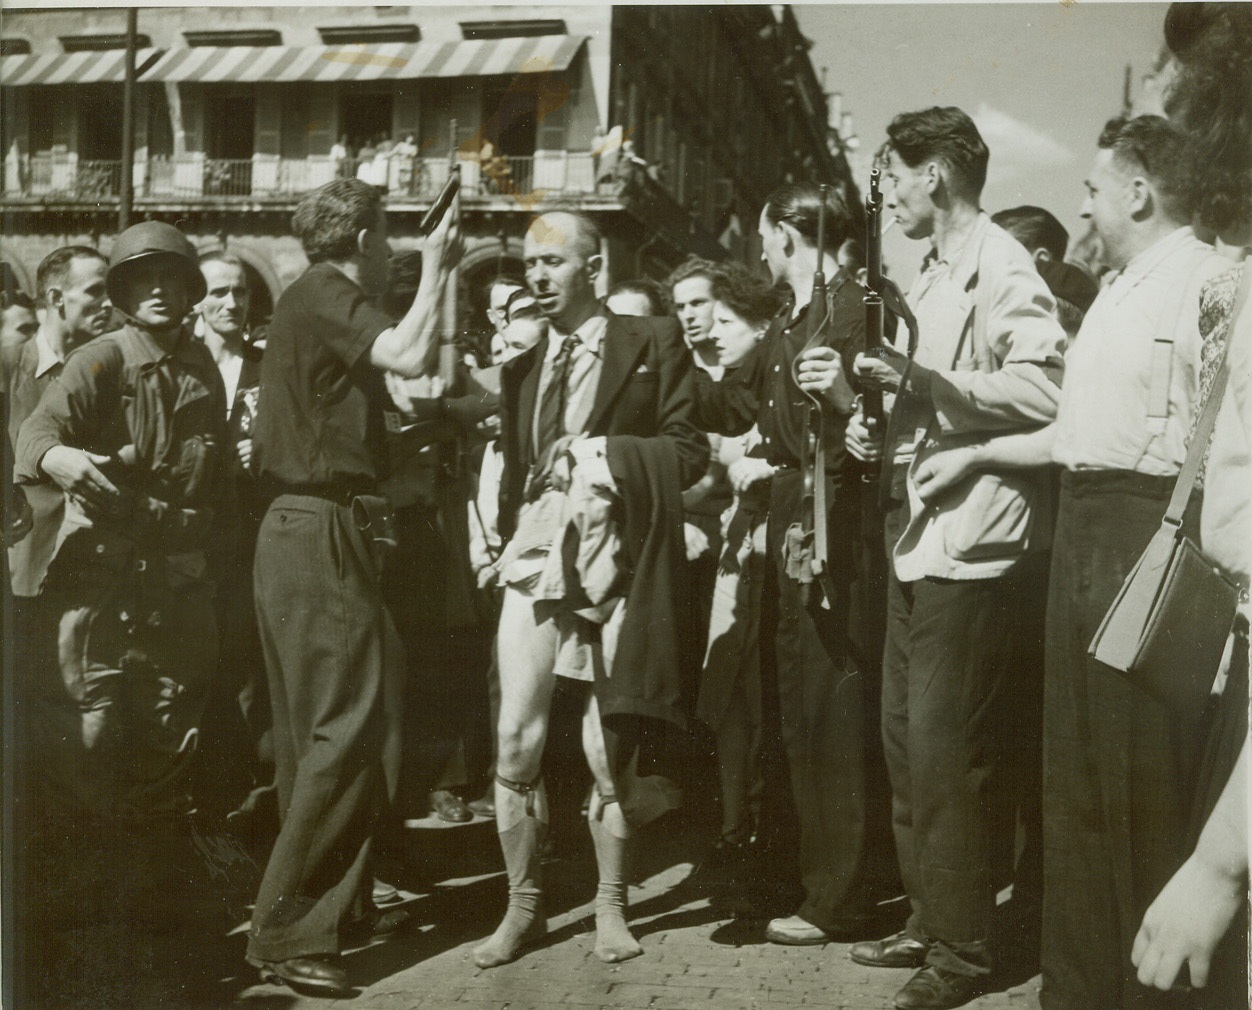 Collaborationist Who Needed “Protective Custody”, 8/28/1944. Paris—This collaborationist who lost his pants to an angry group of Parisians is shown being saved by the F.F.I. and taken into their protective custody. Credit: ACME photo by Bert Brandt for the war picture pool;